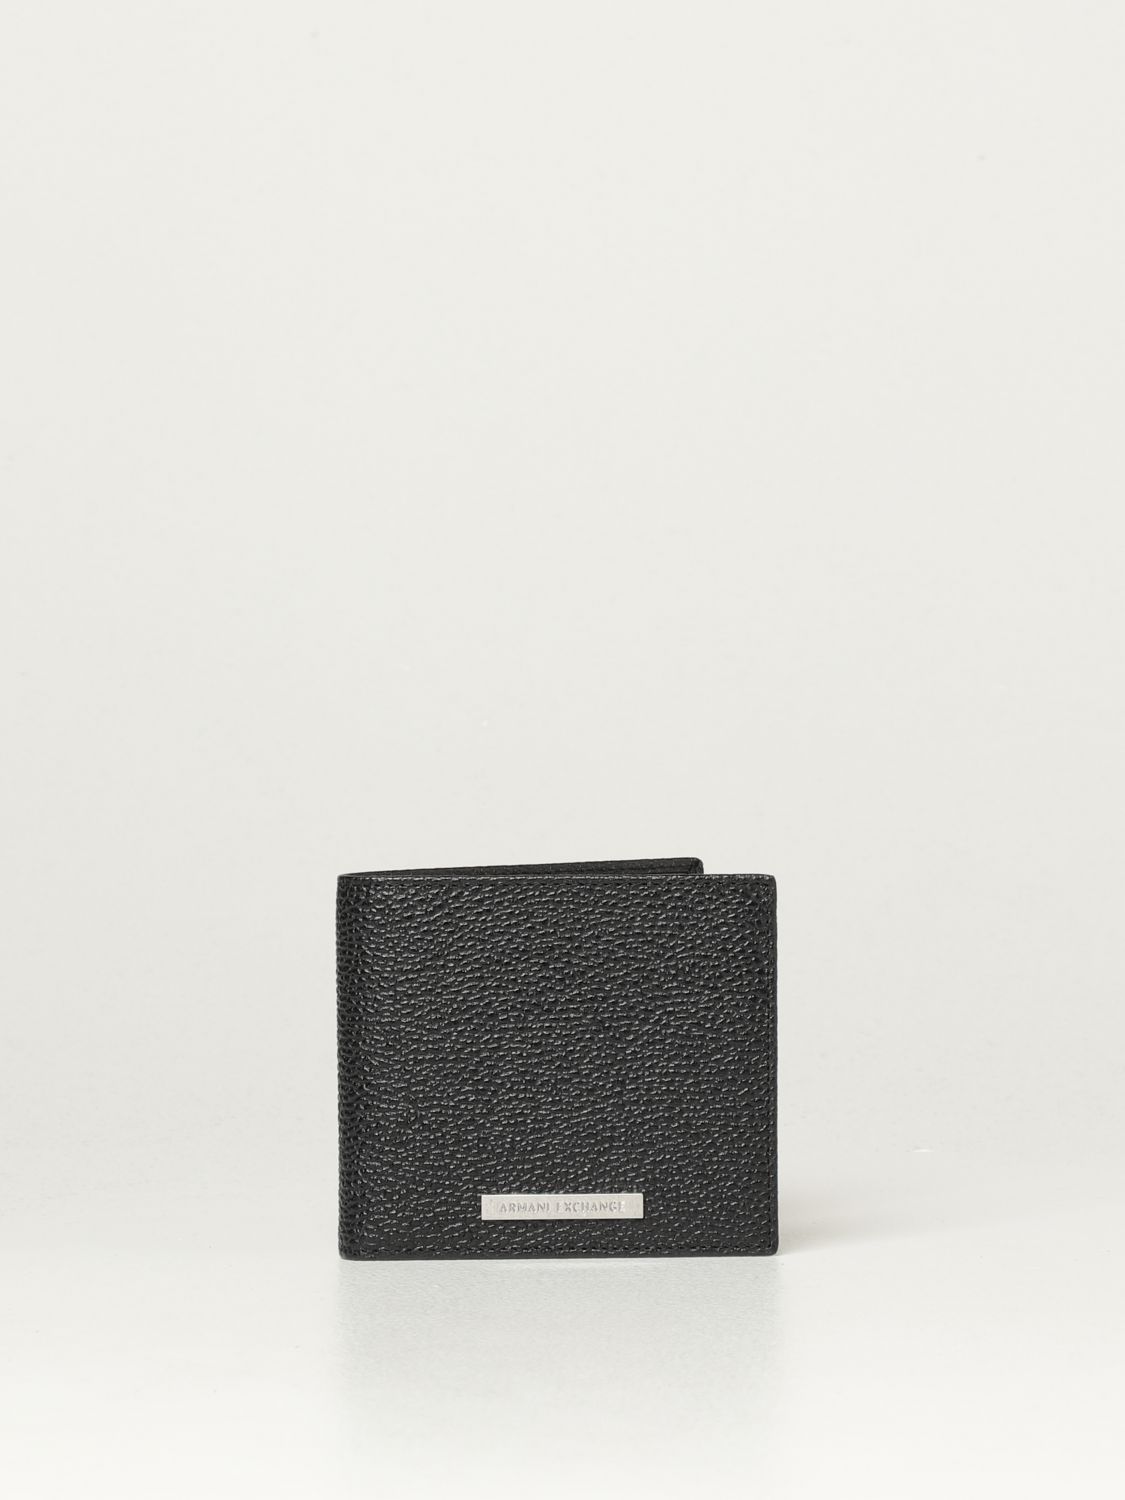 ARMANI EXCHANGE: wallet in textured leather | Wallet ...